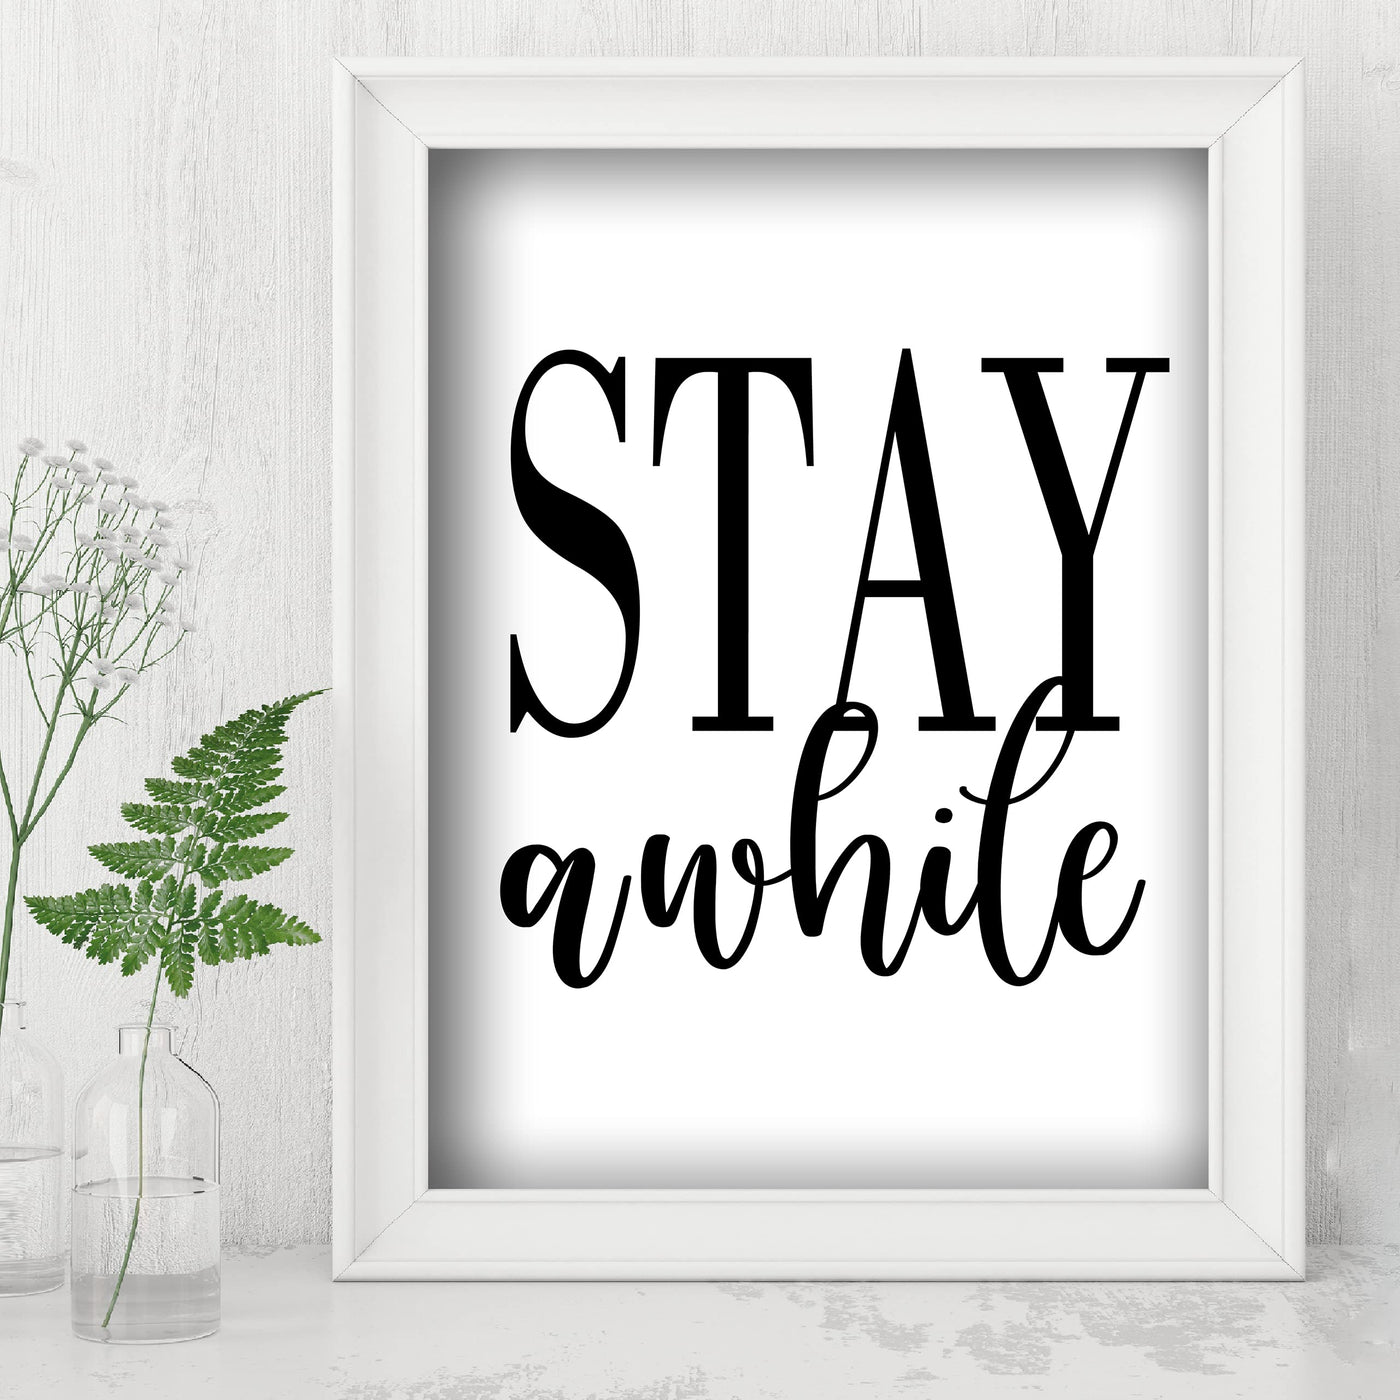 Stay Awhile-Welcome Sign Wall Art -8 x 10" Country Rustic Print -Ready to Frame. Modern Farmhouse Design. Home-Entry-Guest Room Decor. Perfect Decoration for the Cabin-Lake-Beach House! Great Gift!